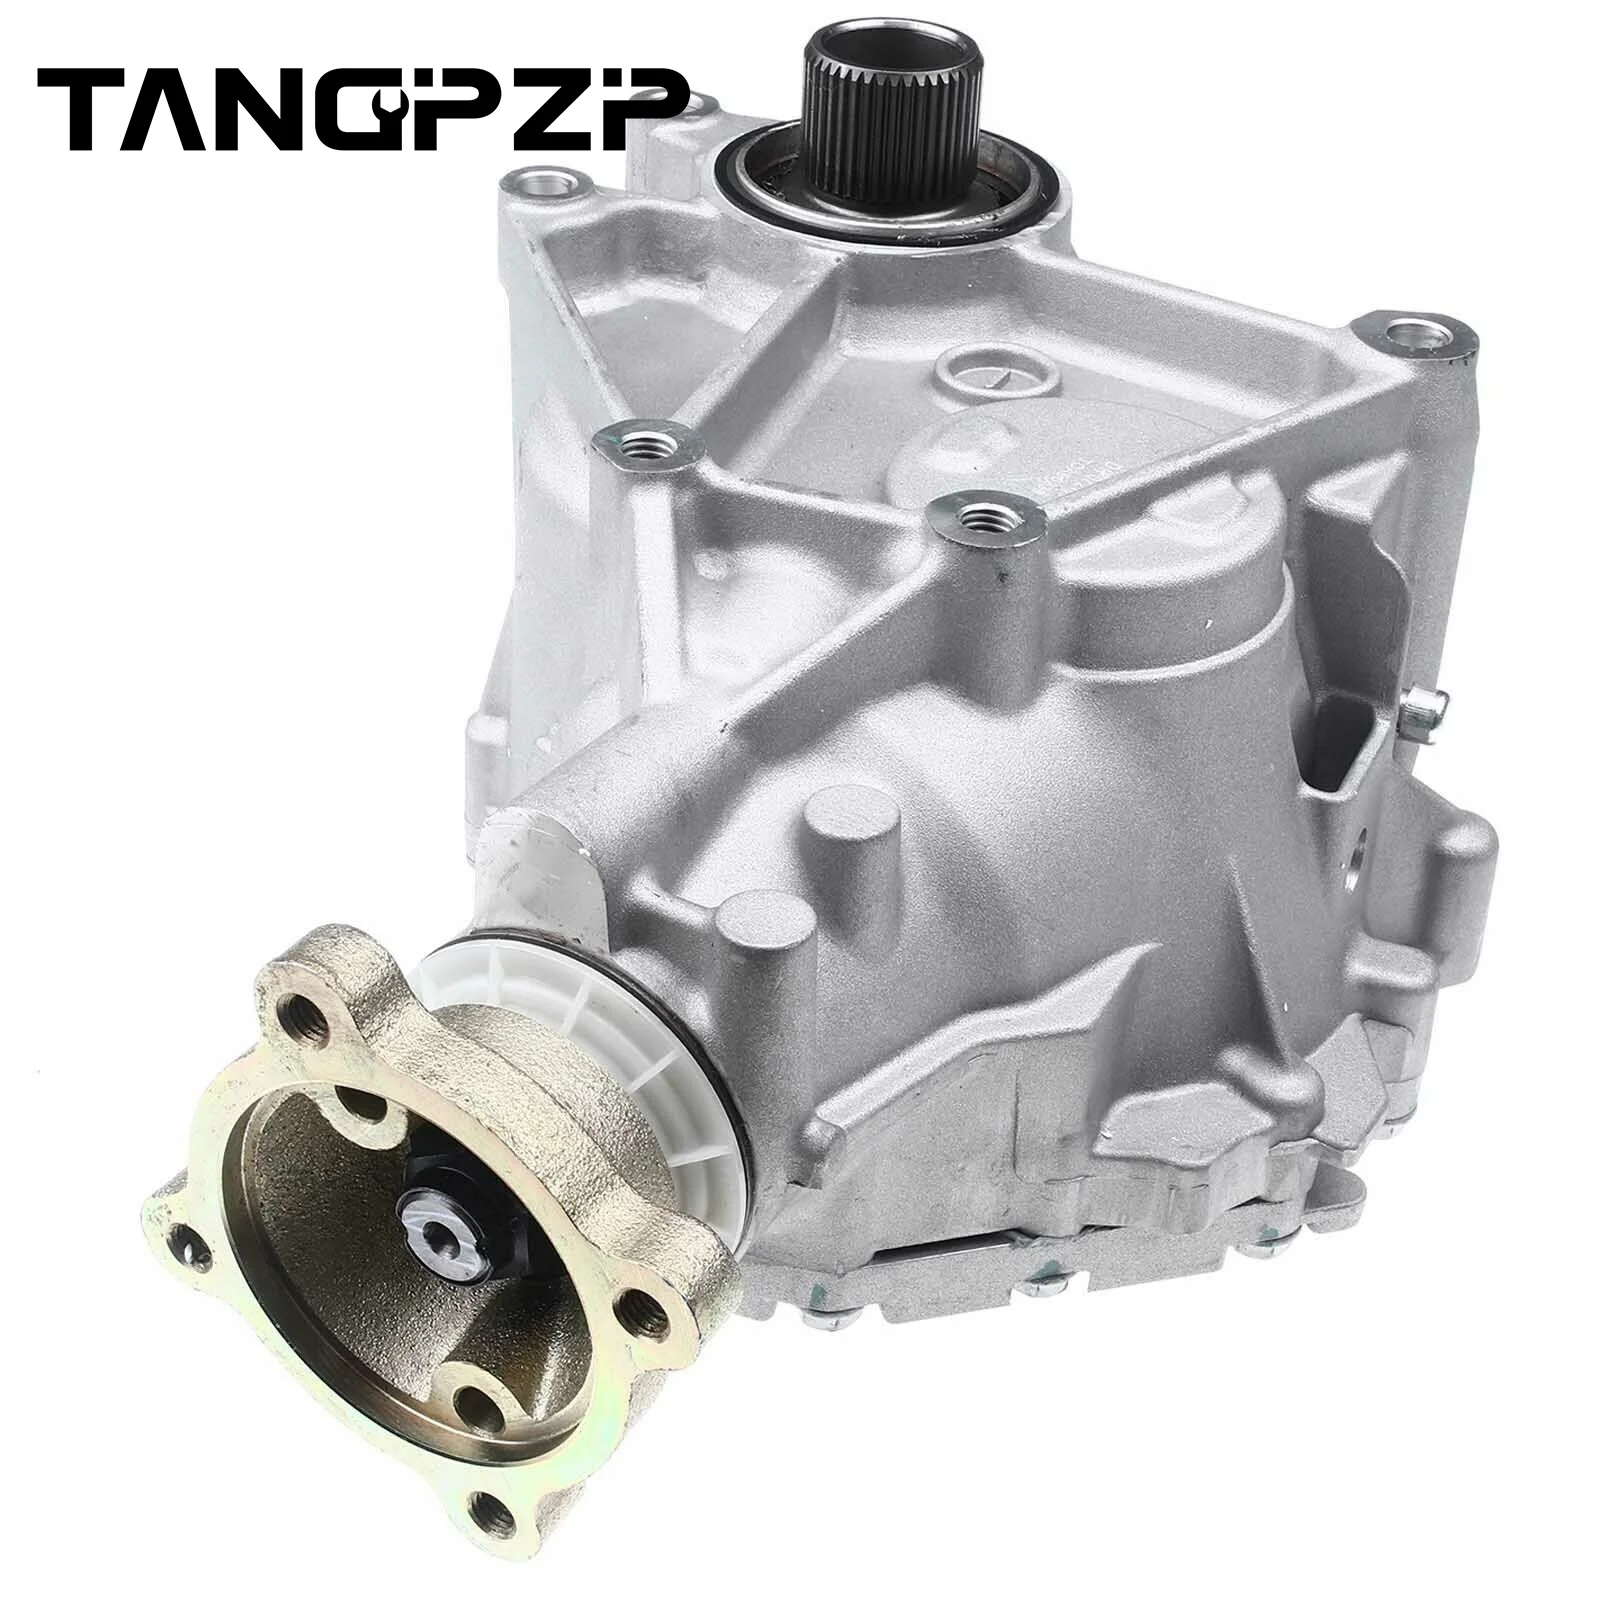 

AT437251EL NEW Power Take Off Unit Transfer Case Differential Assembly DT4Z7251G AT43-7251-EM 600-239 for Ford Explorer Taurus